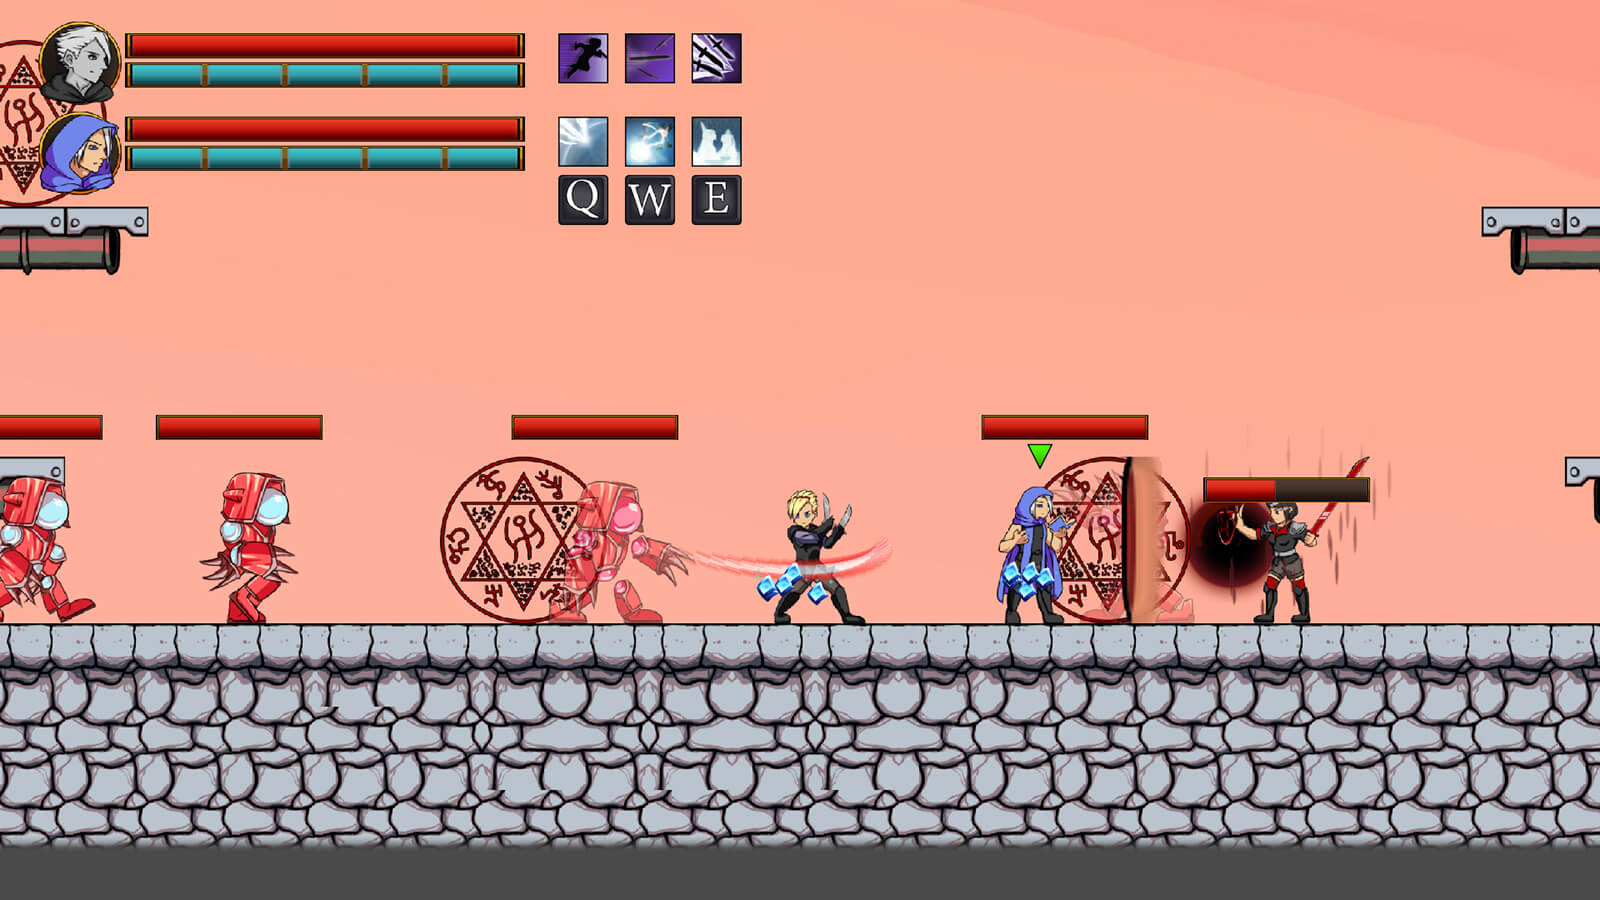 A black-clad thief wielding twin knives and a violet-cloaked mage battle against a wave of 2D enemies on a stone road.